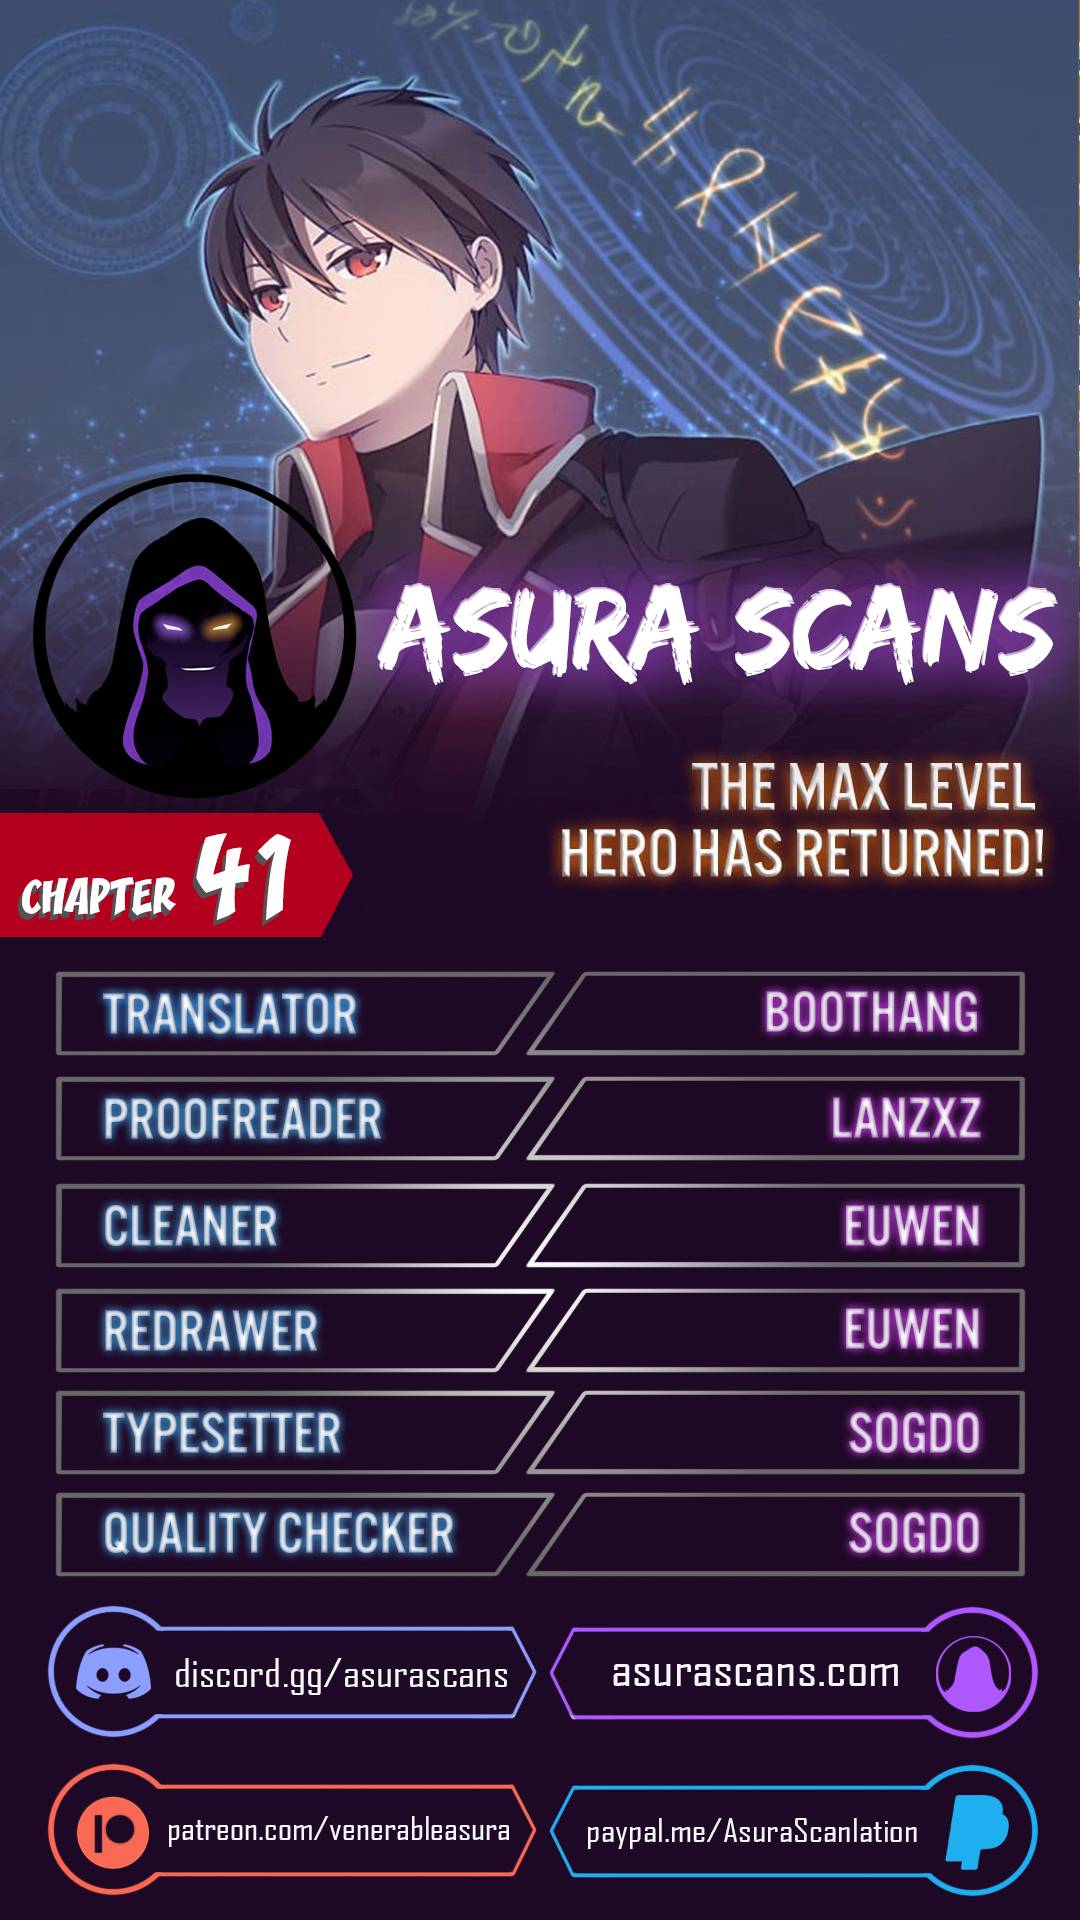 The MAX leveled hero will return! Chapter 41